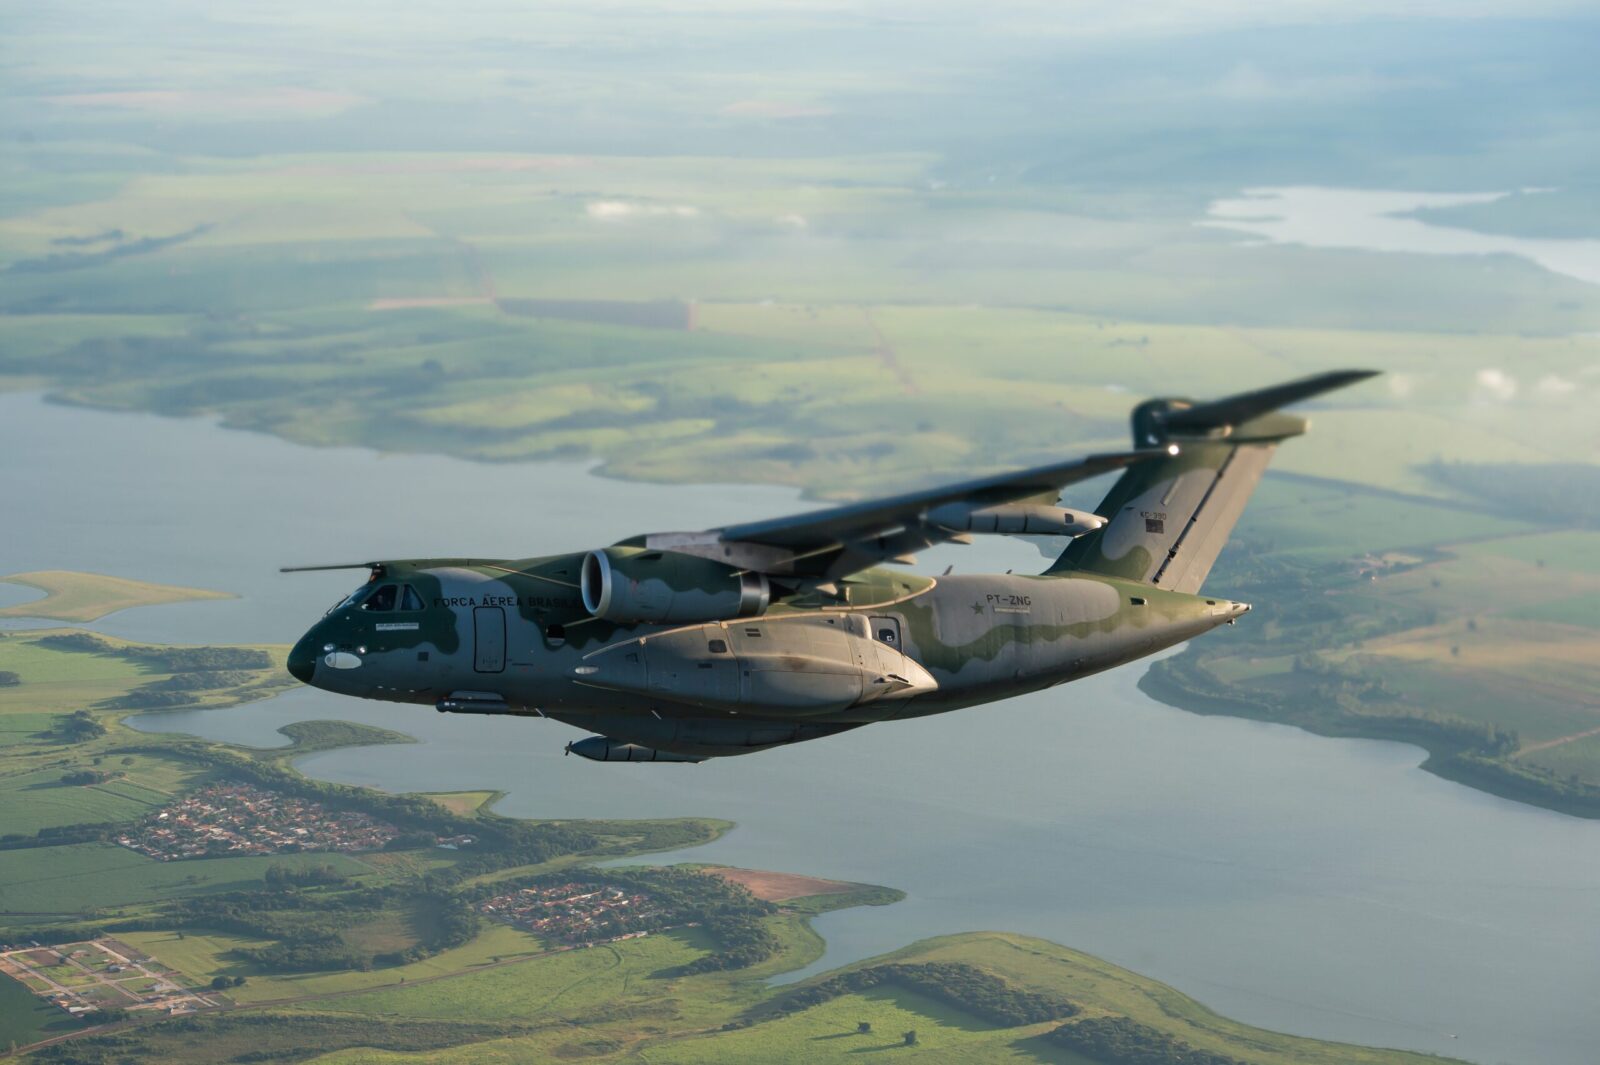 the Brazilian Air Force operates 125 transport aircraft.